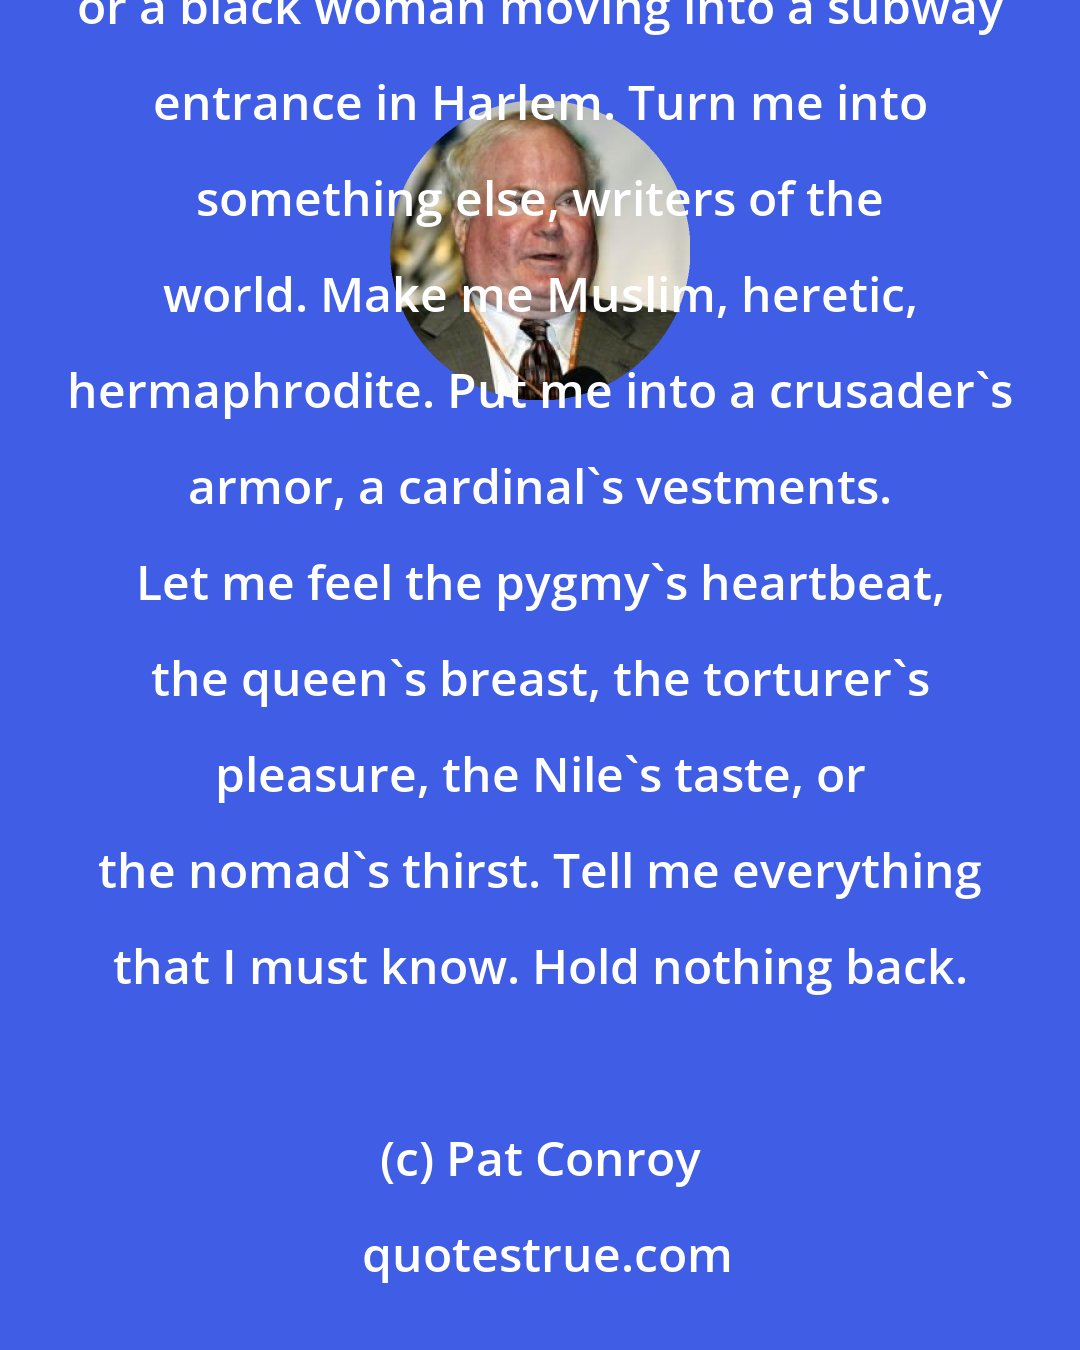 Pat Conroy: Here's what I love: when a great writer turns me into a Jew from Chicago, a lesbian out of South Carolina, or a black woman moving into a subway entrance in Harlem. Turn me into something else, writers of the world. Make me Muslim, heretic, hermaphrodite. Put me into a crusader's armor, a cardinal's vestments. Let me feel the pygmy's heartbeat, the queen's breast, the torturer's pleasure, the Nile's taste, or the nomad's thirst. Tell me everything that I must know. Hold nothing back.